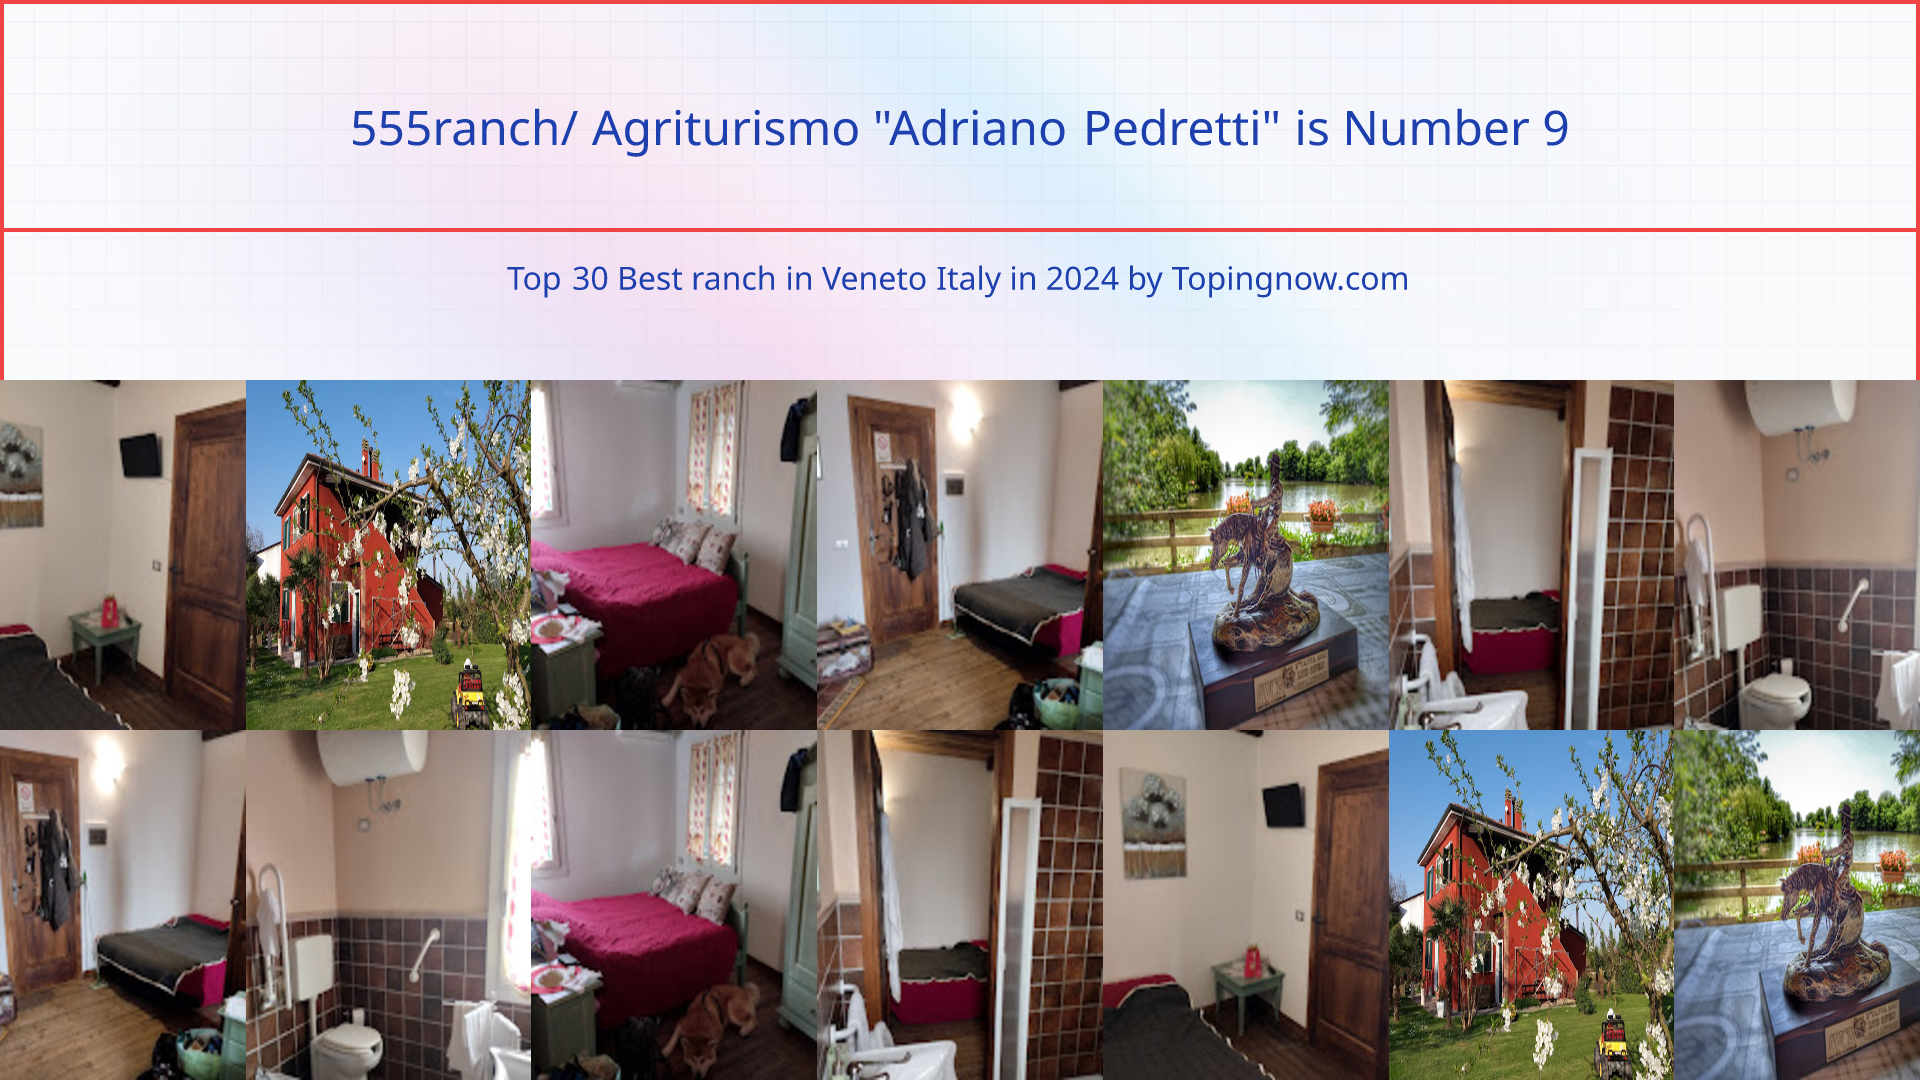 555ranch/ Agriturismo "Adriano Pedretti": Top 30 Best ranch in Veneto Italy in 2024